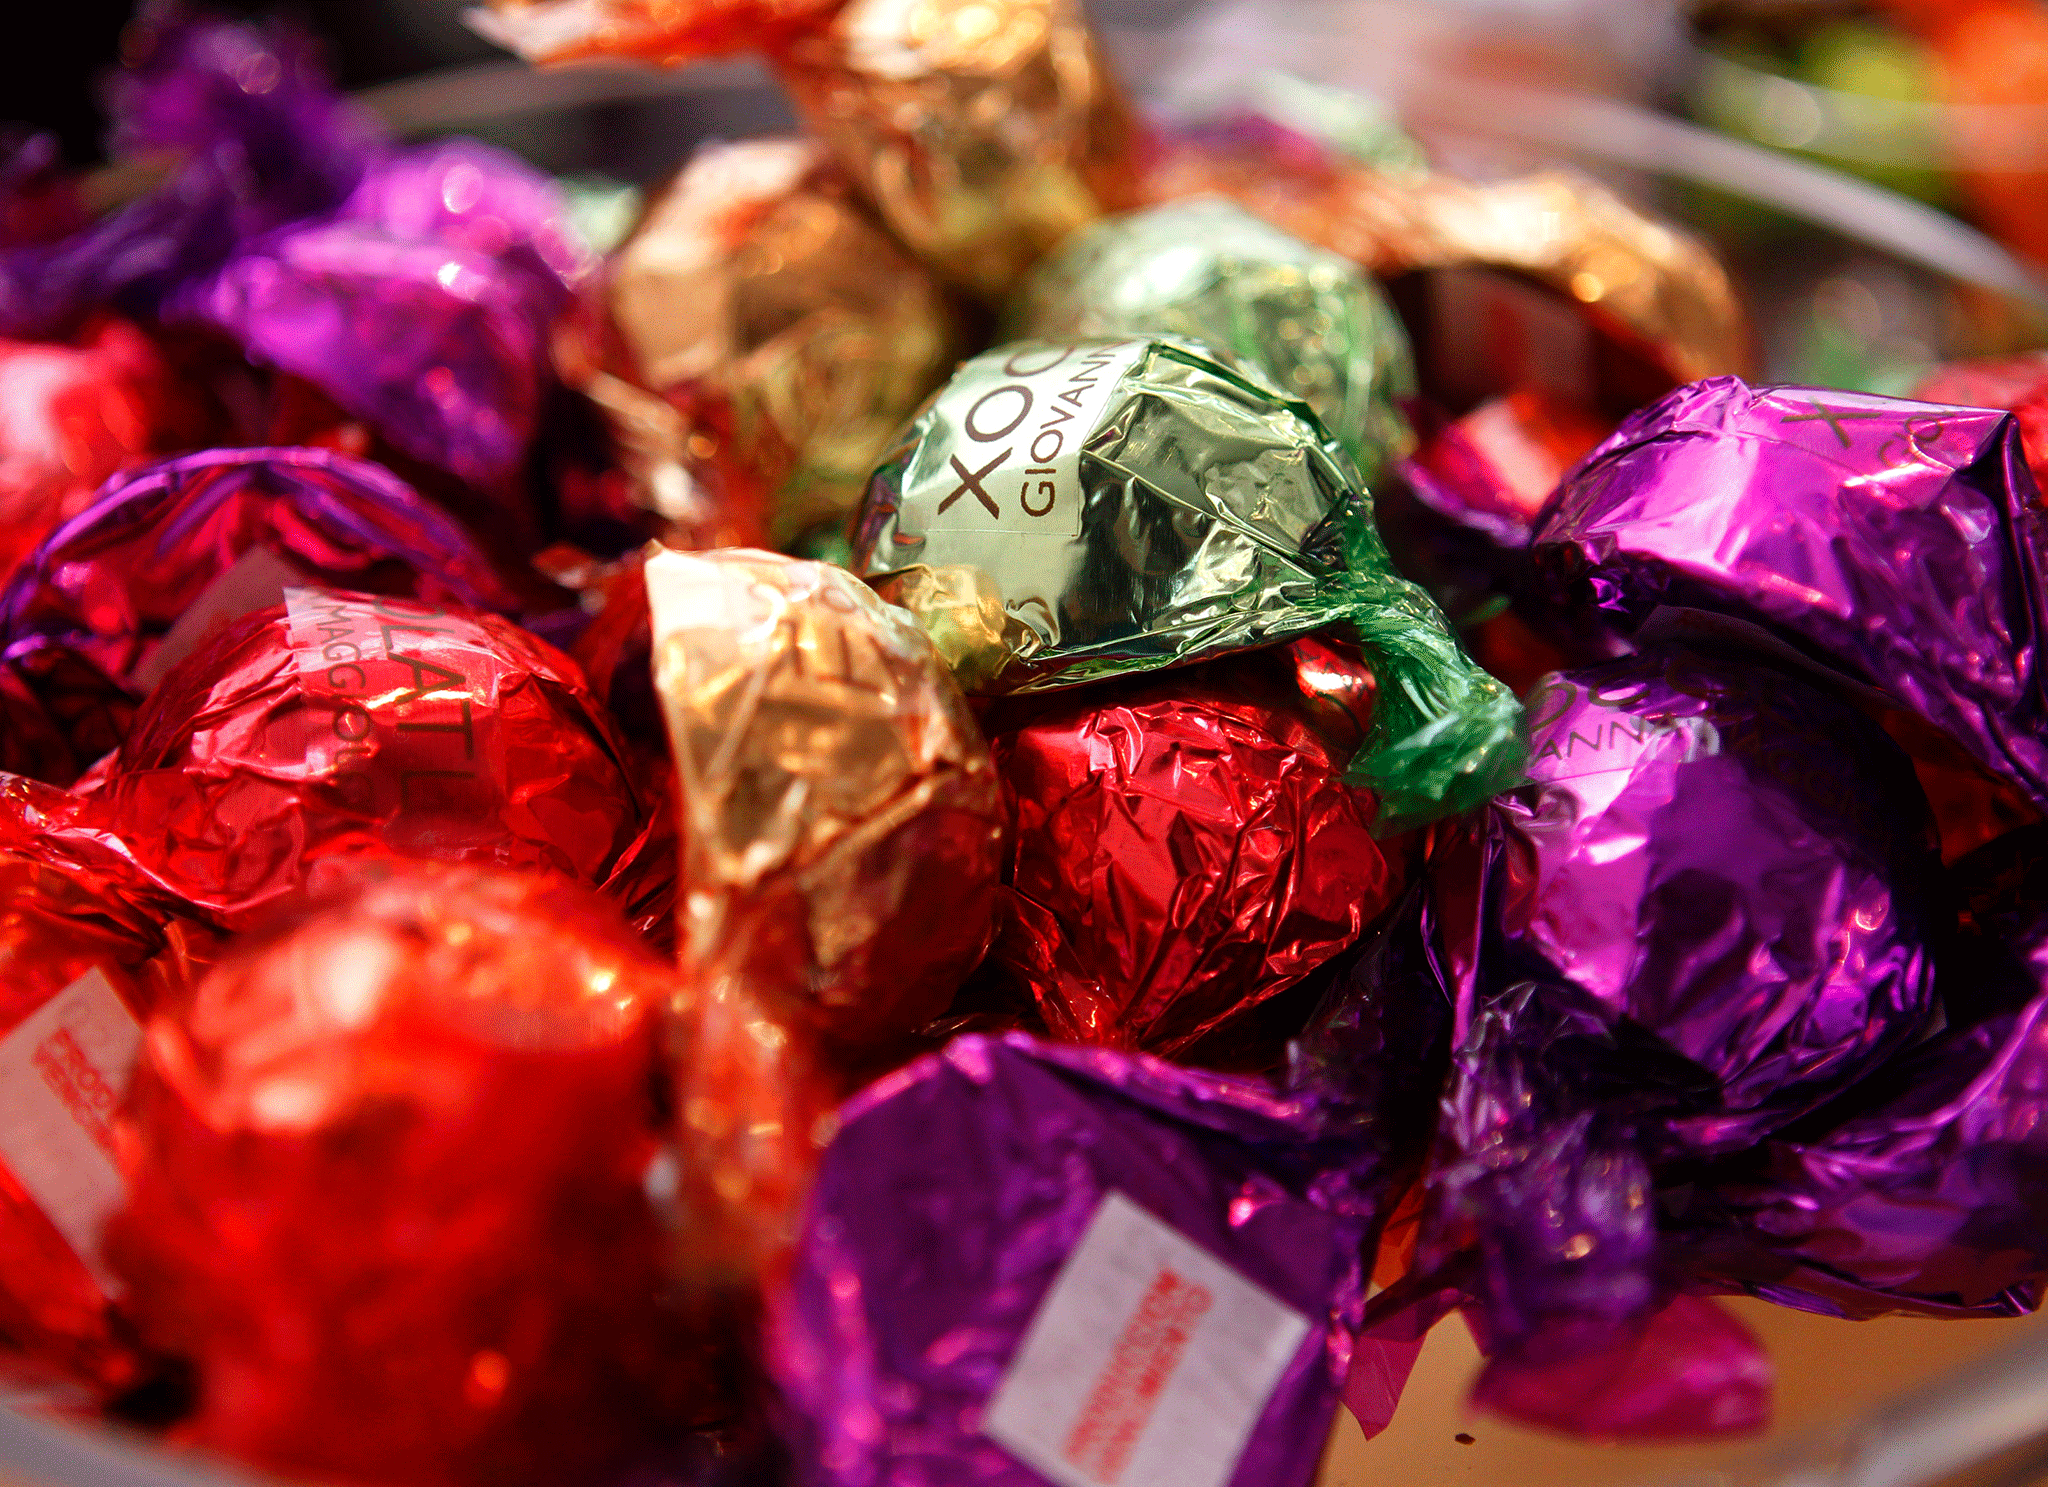 Rising production costs for chocolate mean that many manufactures have to consider downsizing